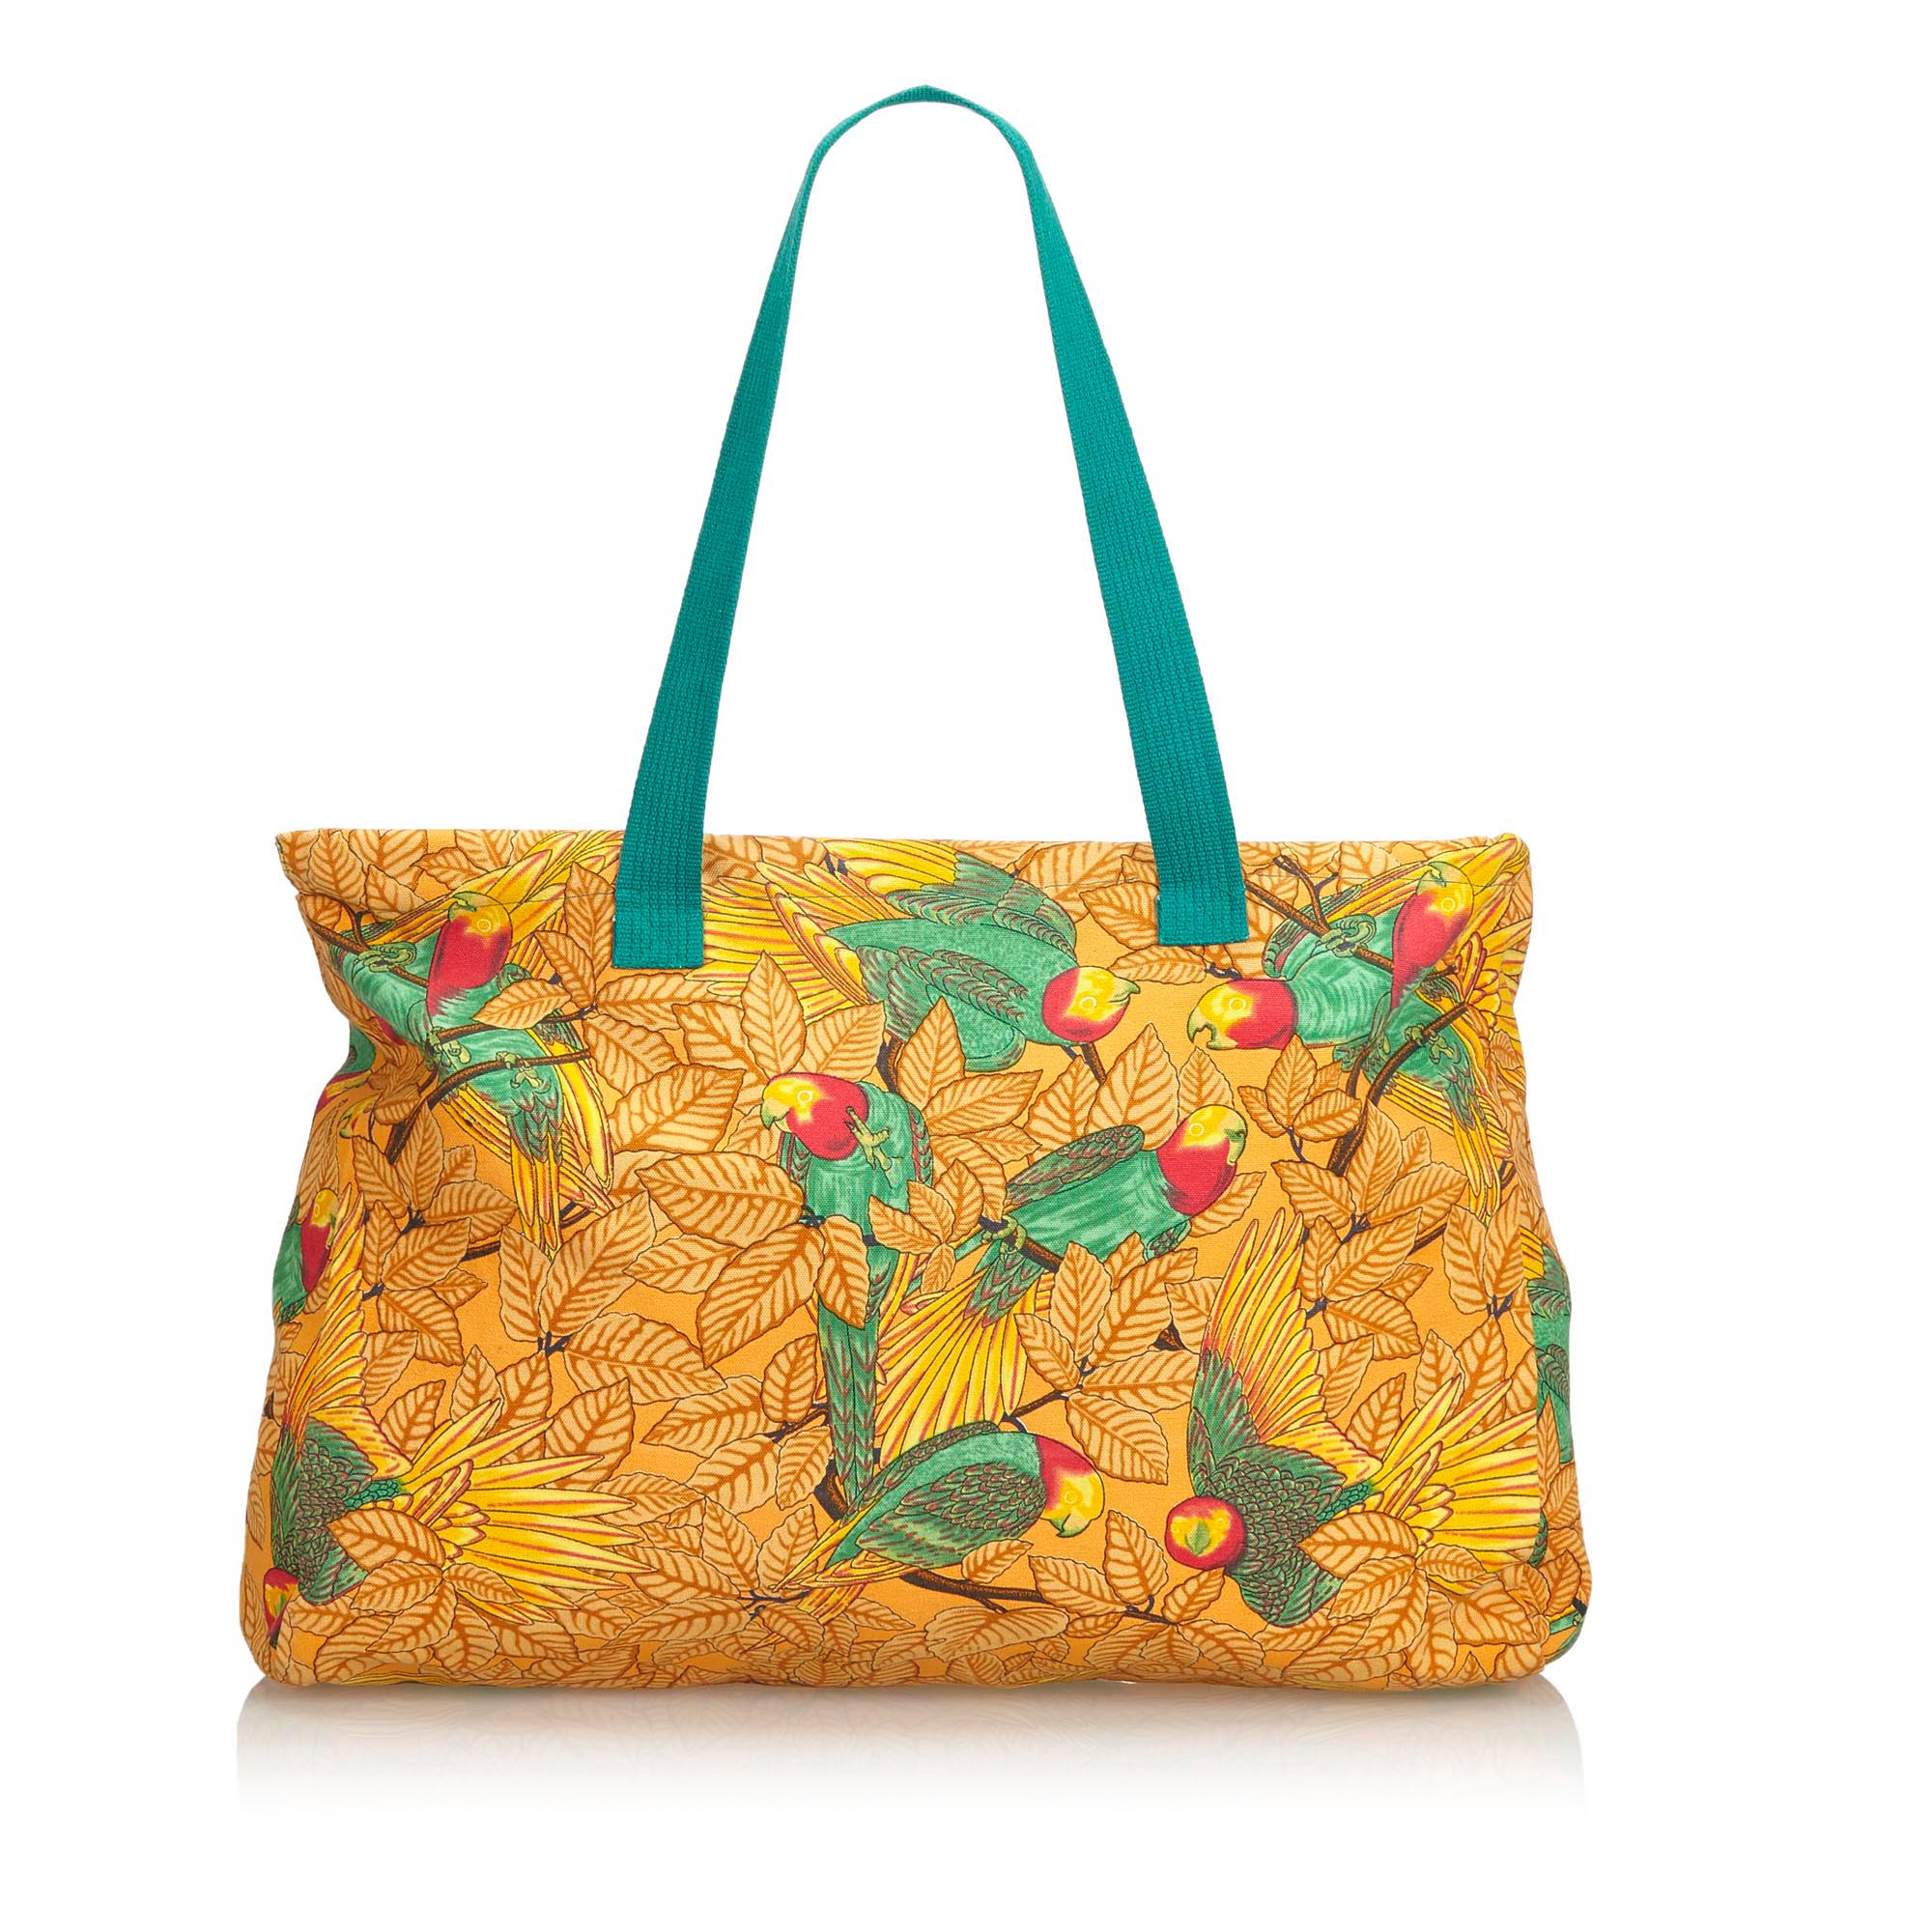 Hermes Printed Canvas Tote Bag, this tote bag features a printed canvas body, flat handles, and an